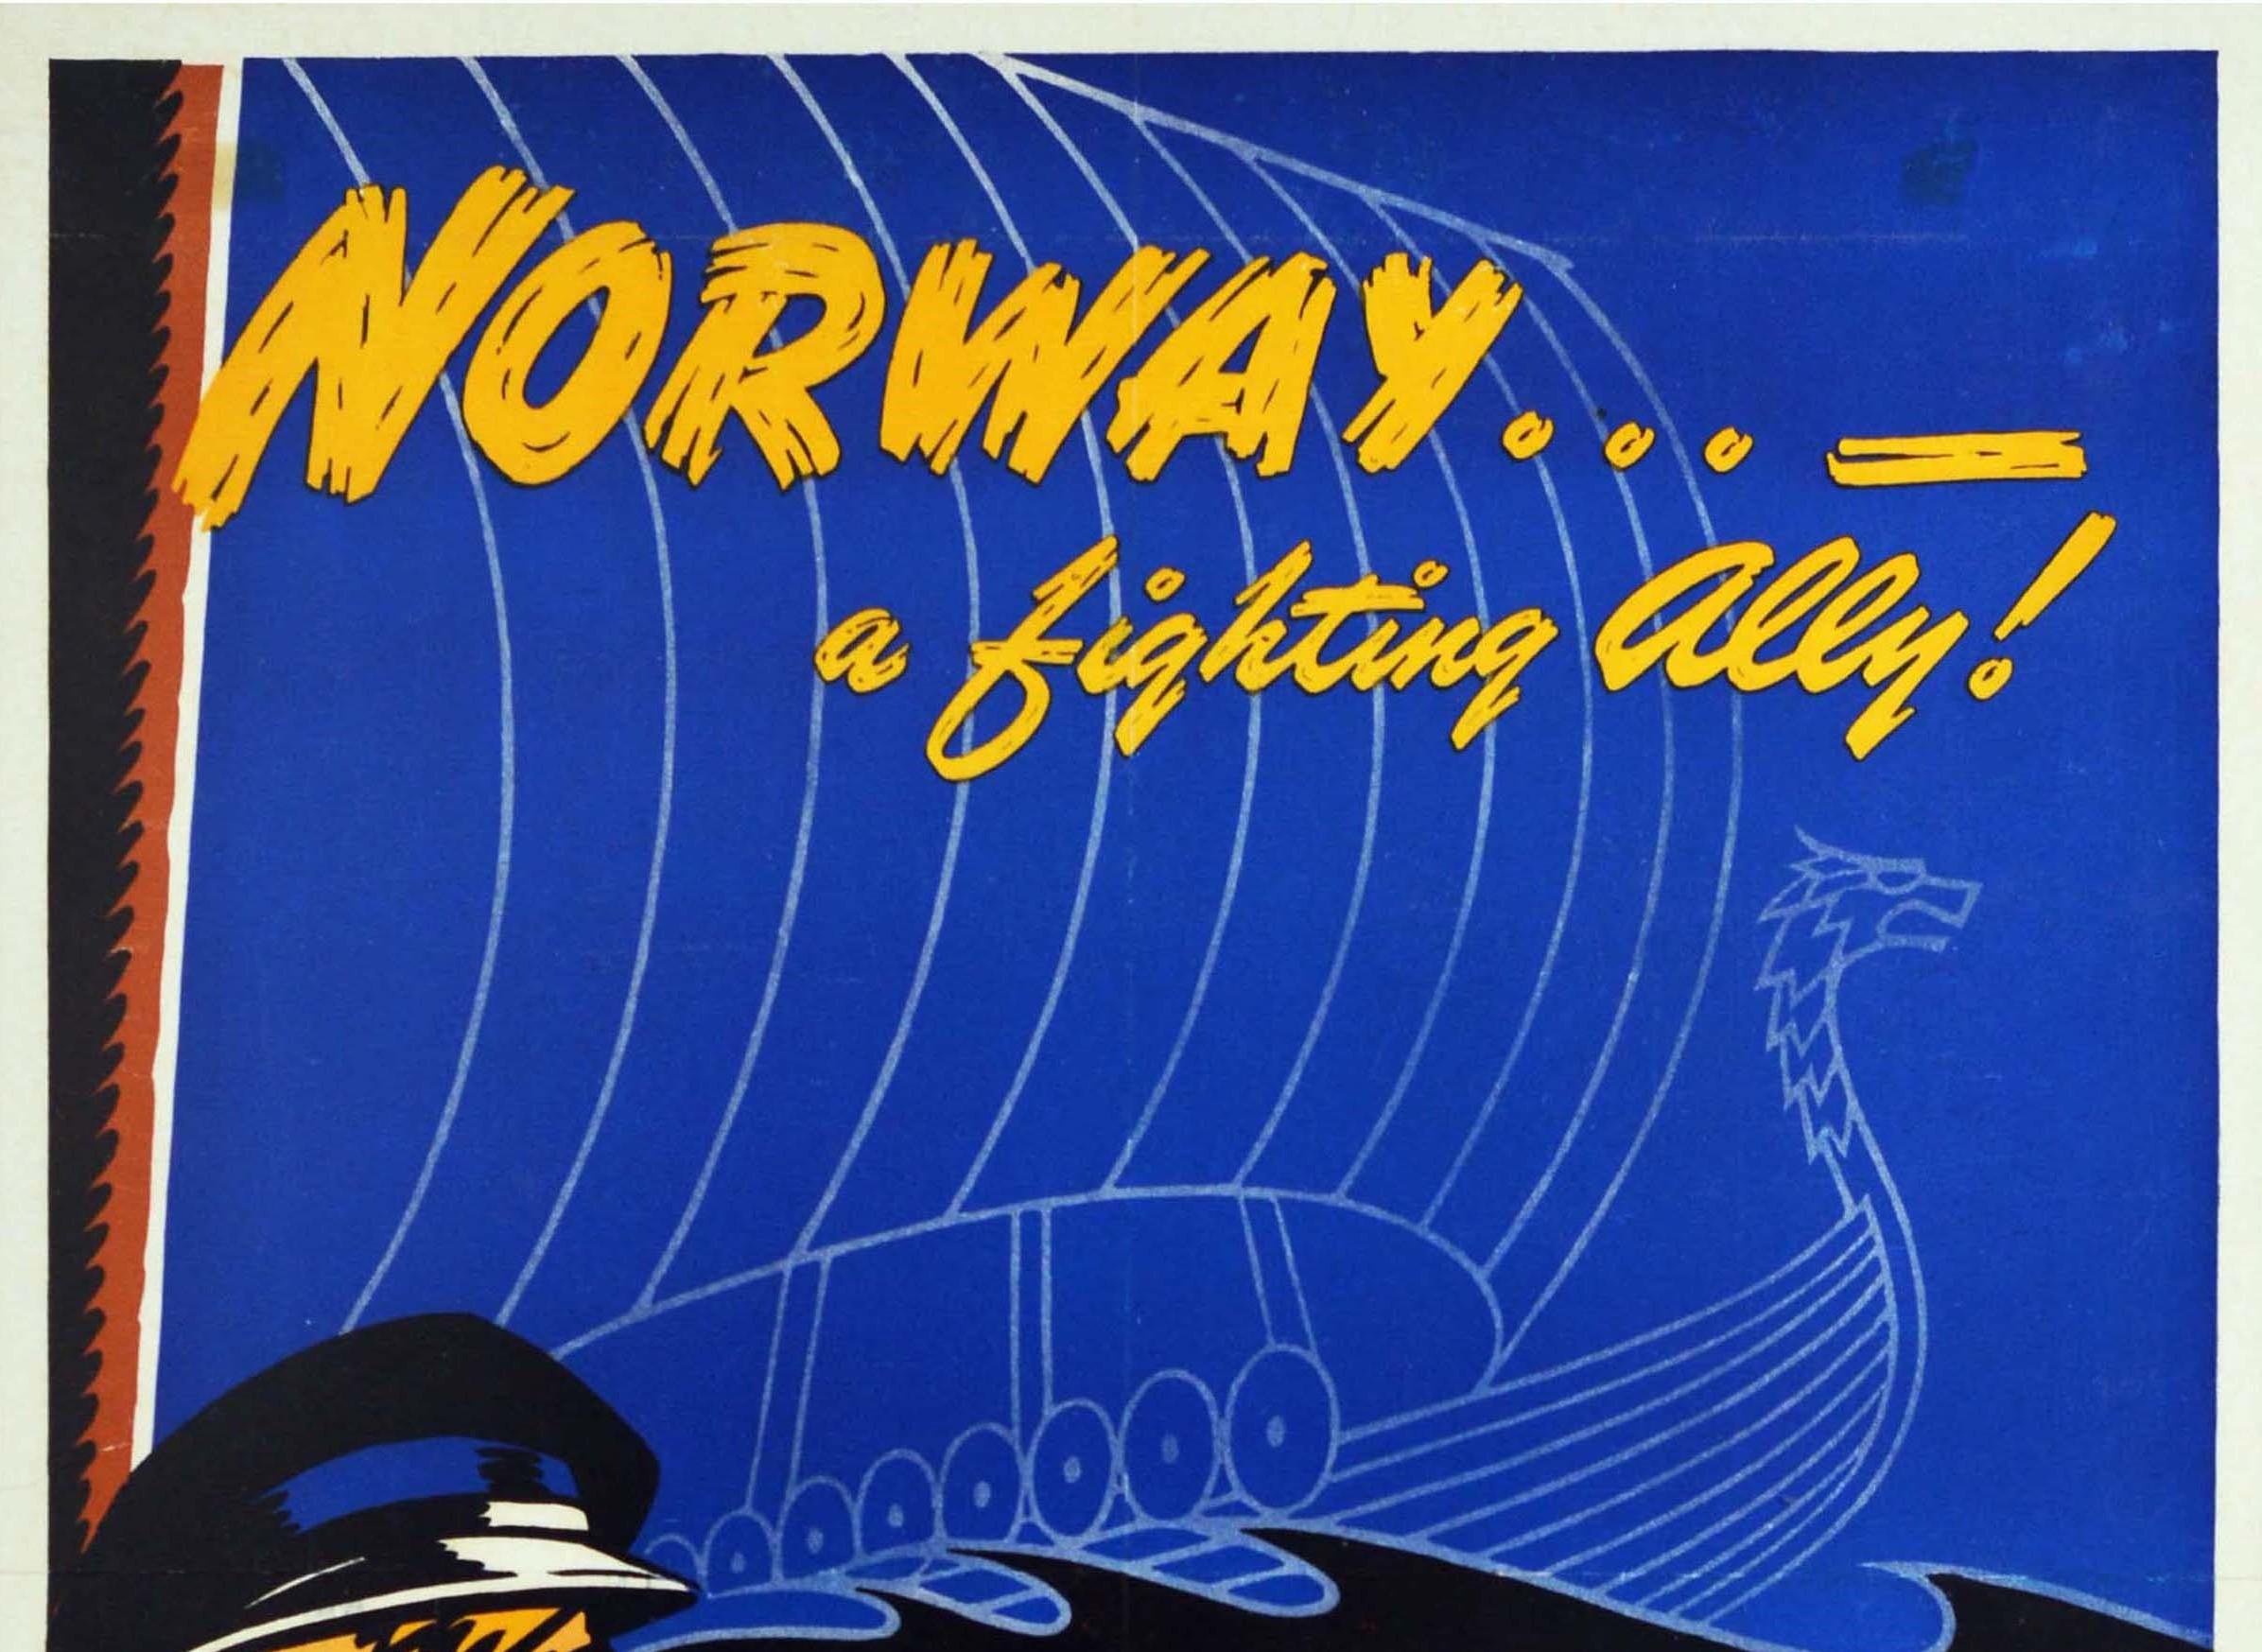 Original vintage World War Two poster for Norway... - A Fighting Ally! featuring a colourful design depicting a sailor looking out to sea with a traditional Viking boat image over a stylised line of military war ships on blue and white waves and